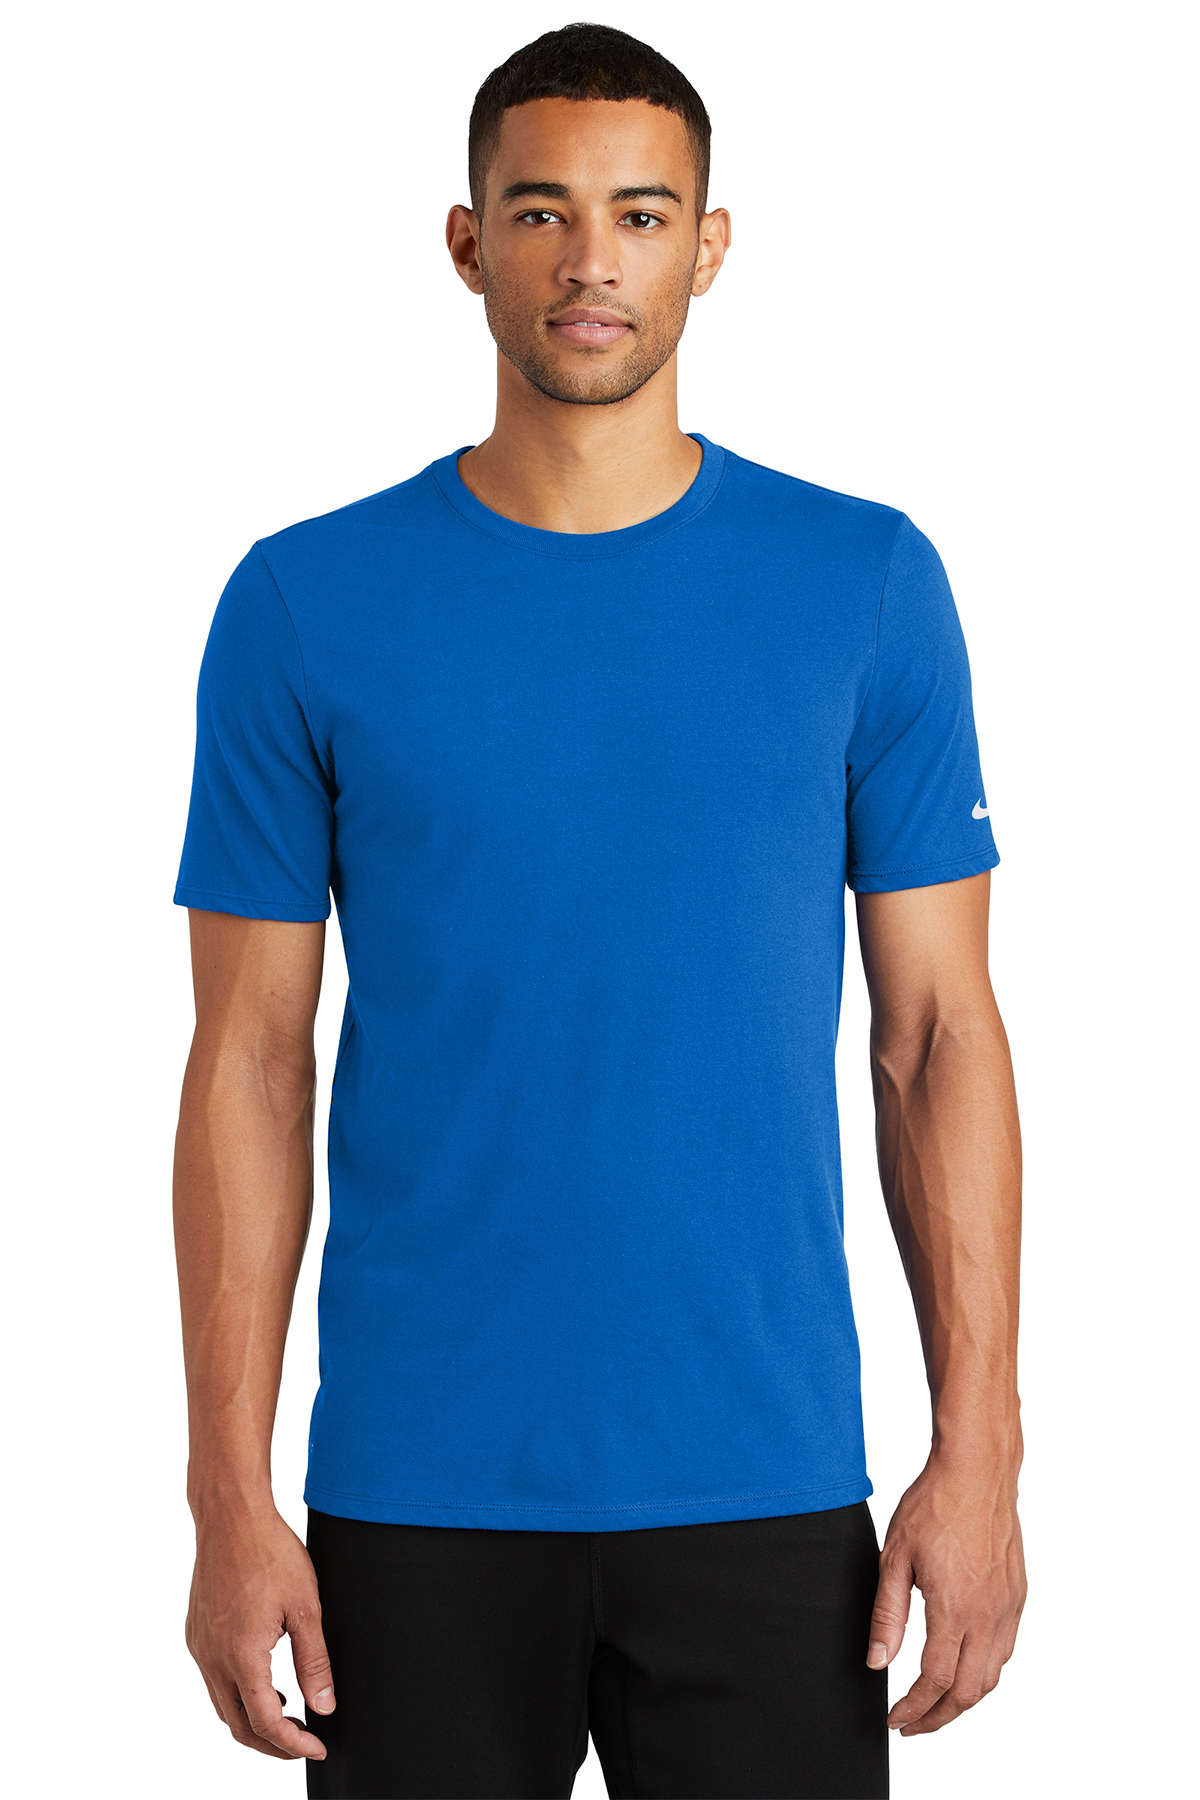 Nike Dri-FIT Cotton/Poly Tee, Product